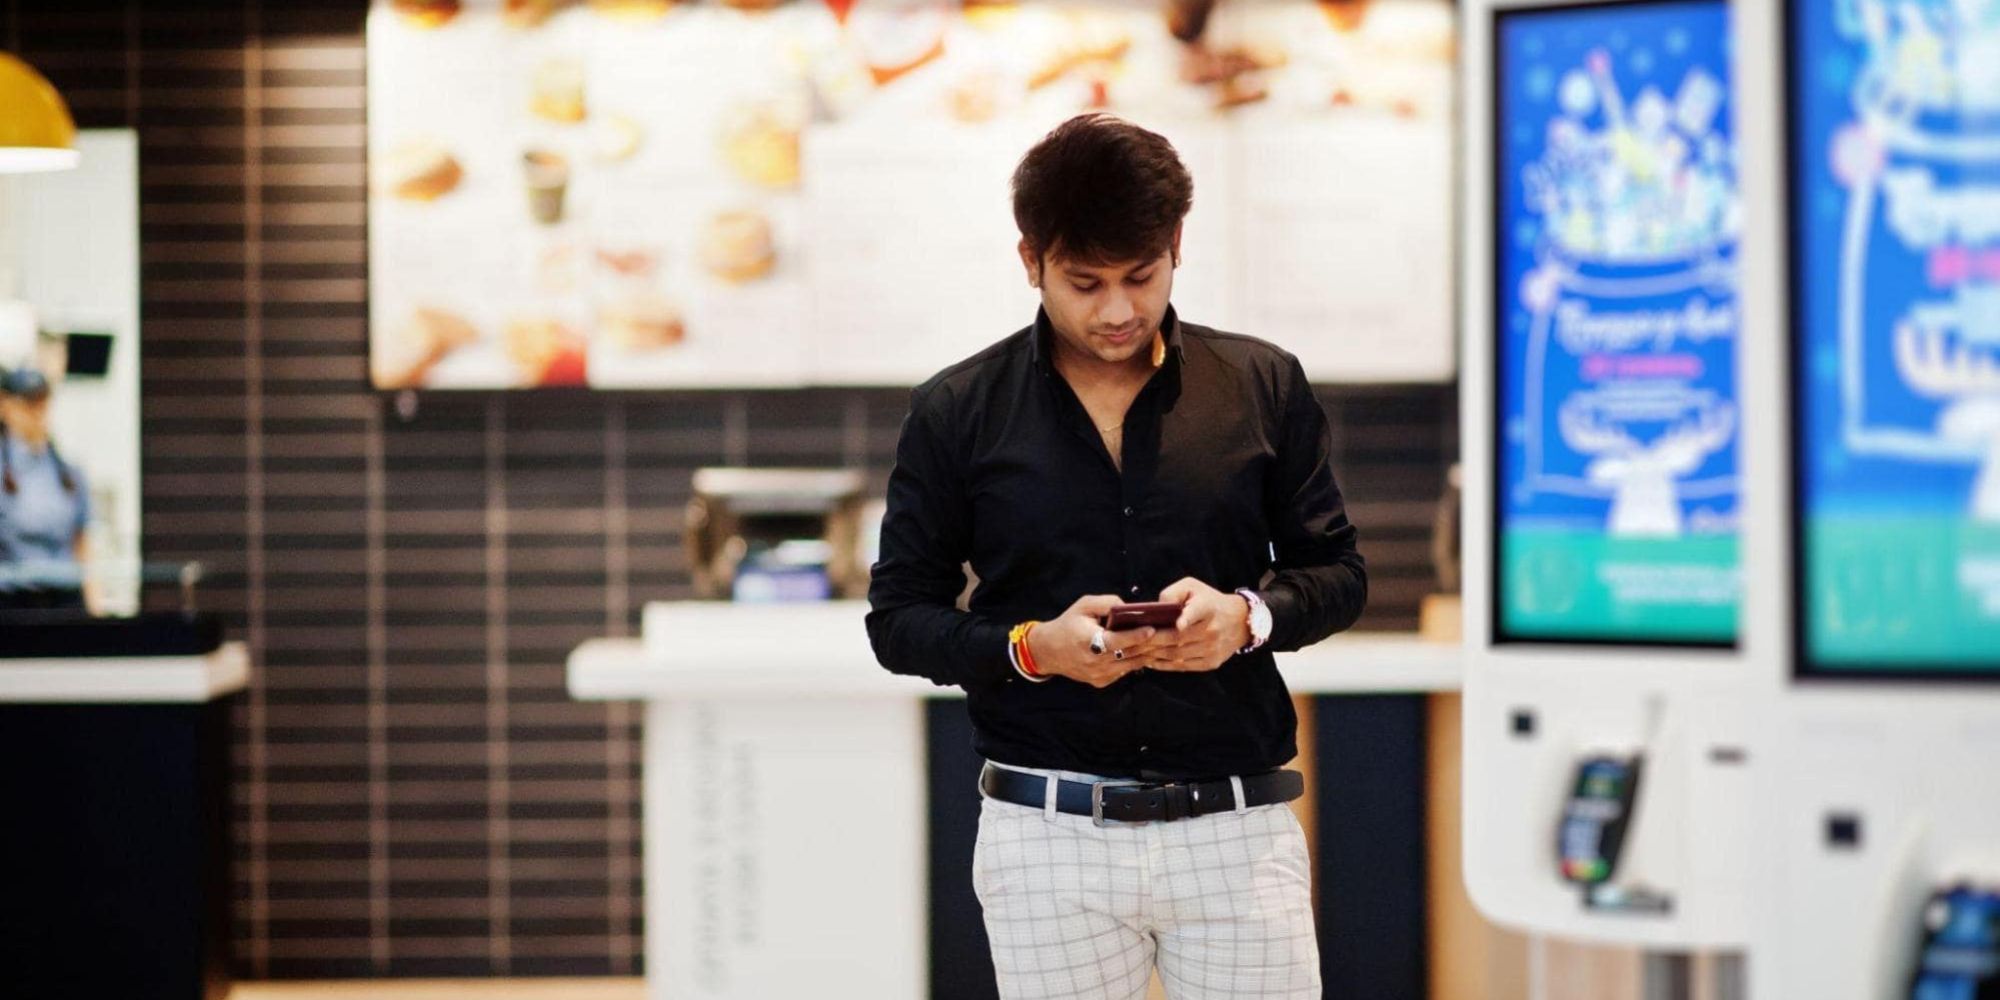 A man in a fast food restaurant filled with point of sale digital signage.